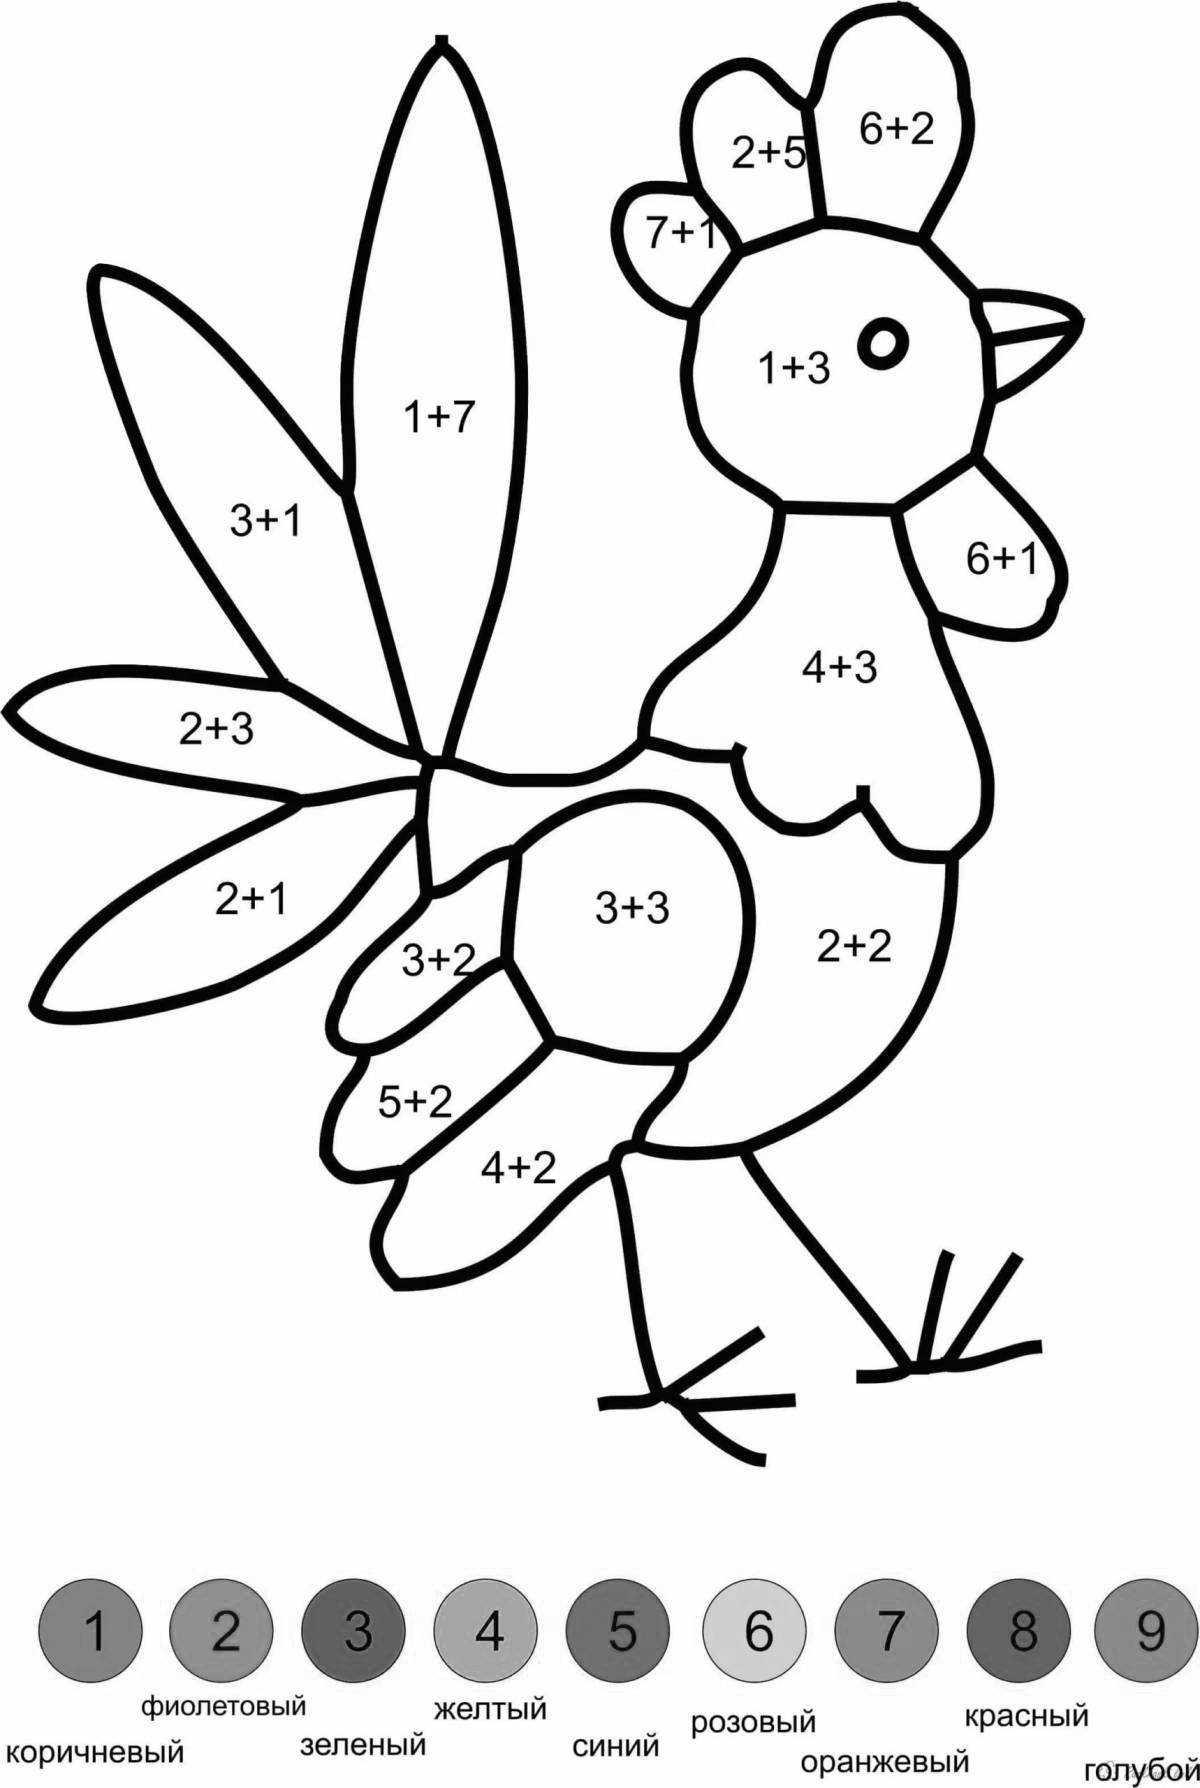 Fun Calculations coloring page